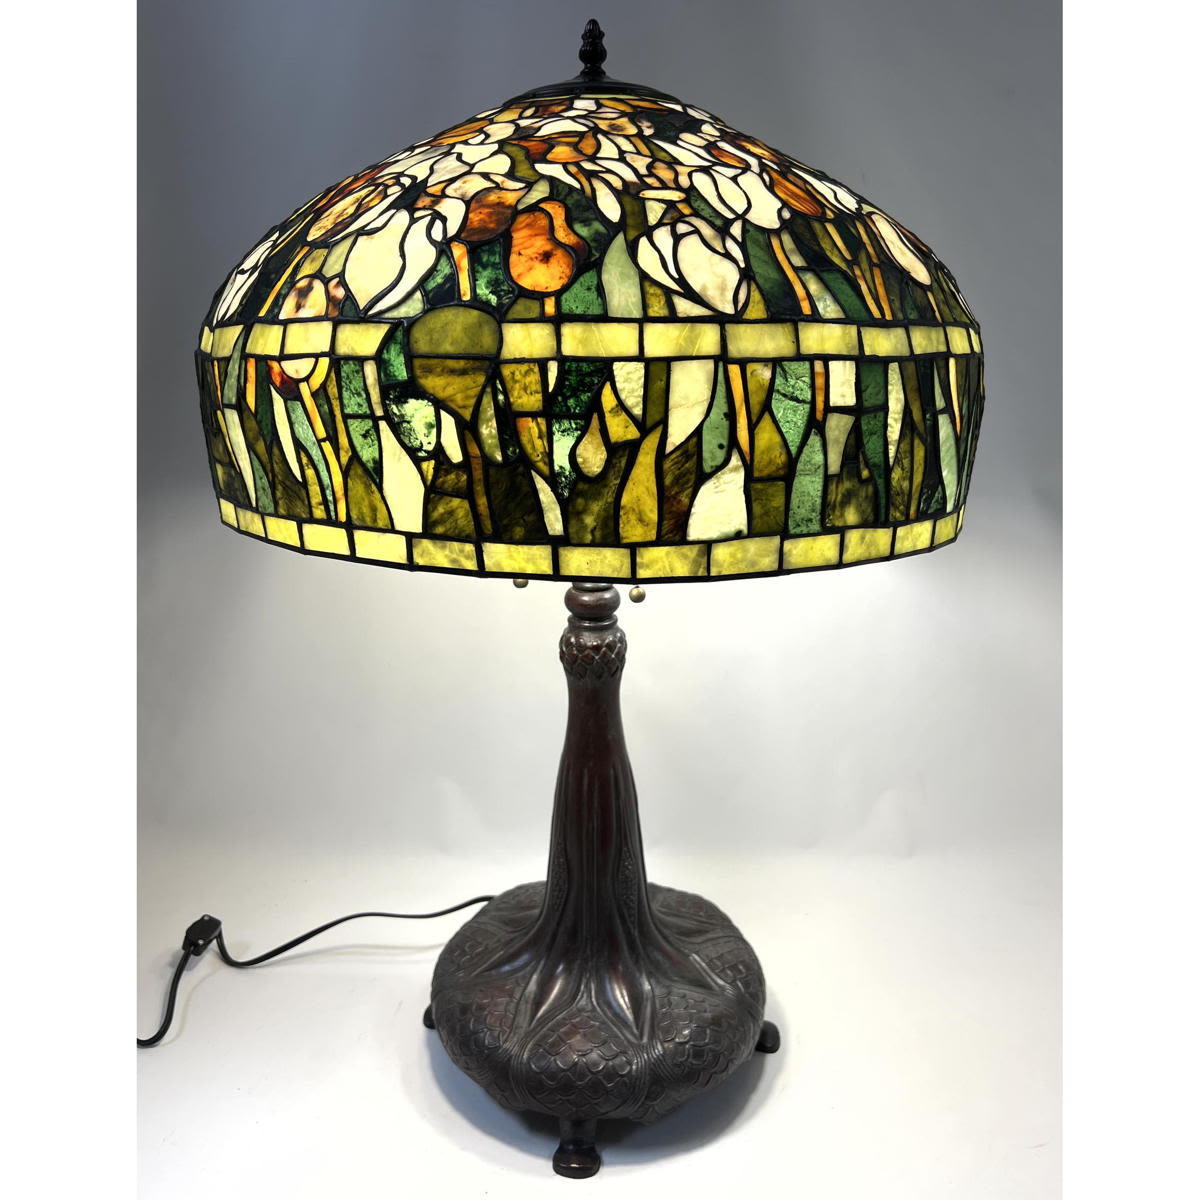 Tiffany style leaded glass table 2a624d